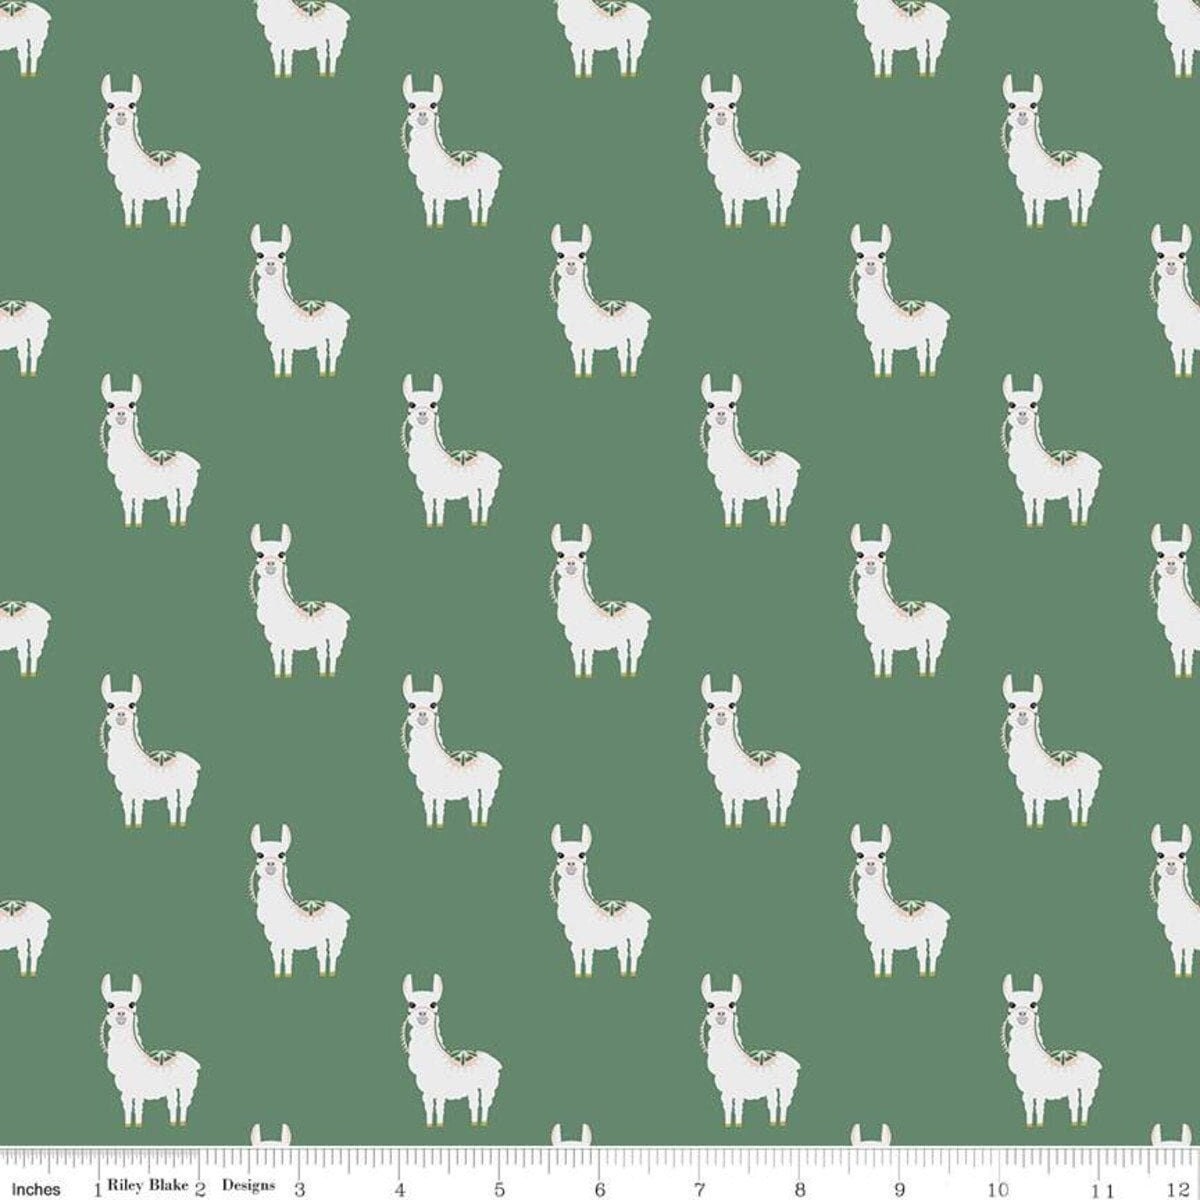 LAMINATED cotton fabric - Hibiscus Llamas (sold continuous by the half yard) Food Safe Fabric, BPA free